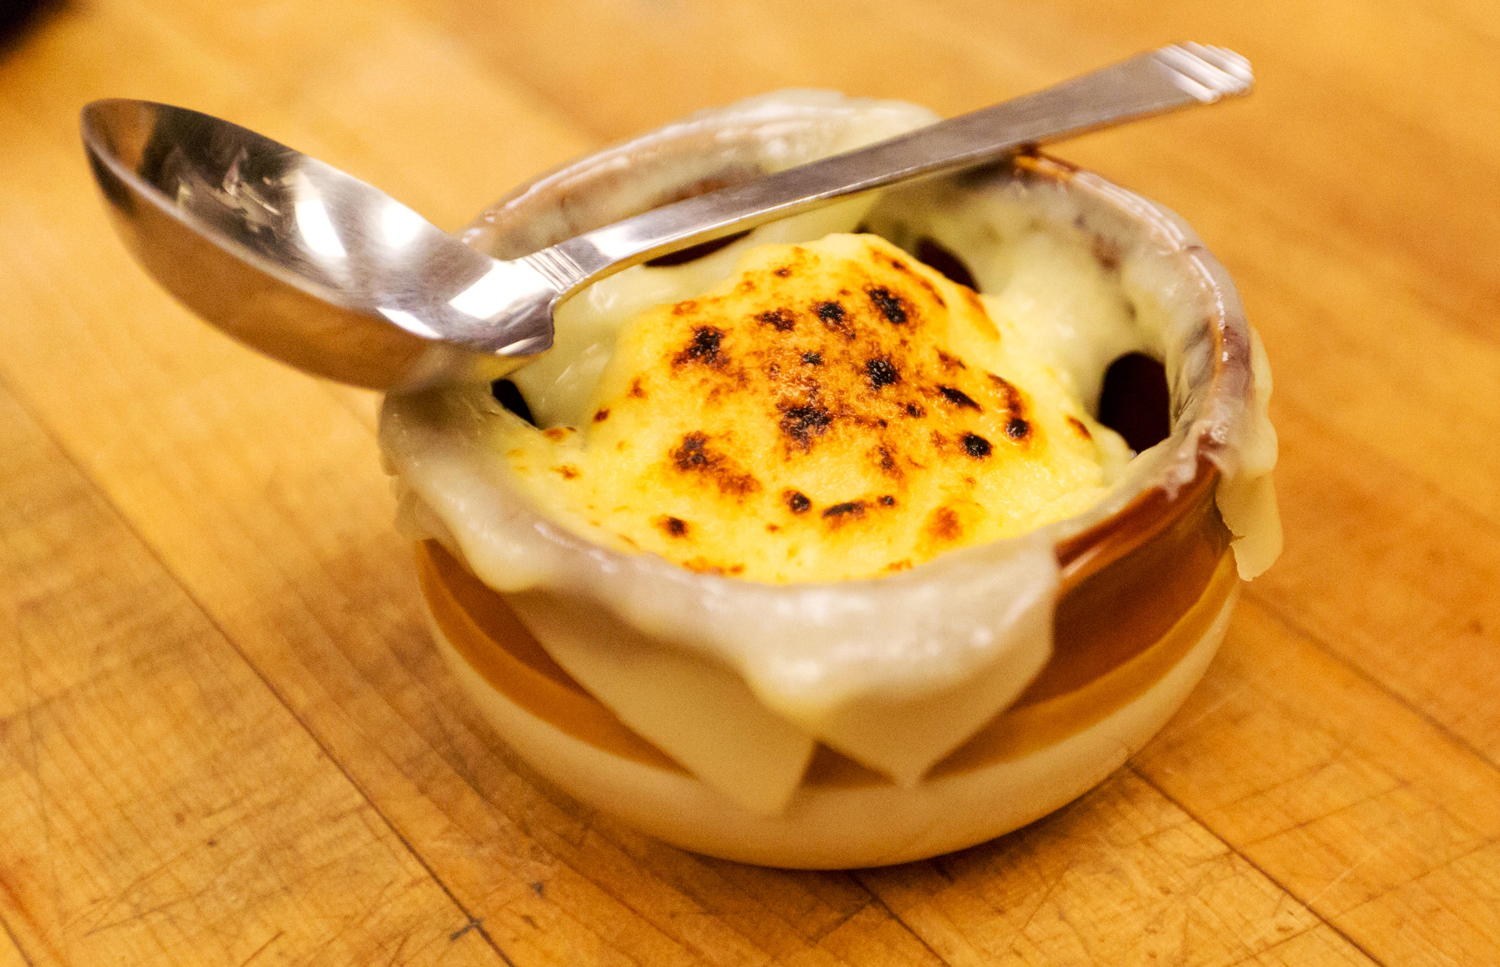 Crock of French onion soup with melted cheese